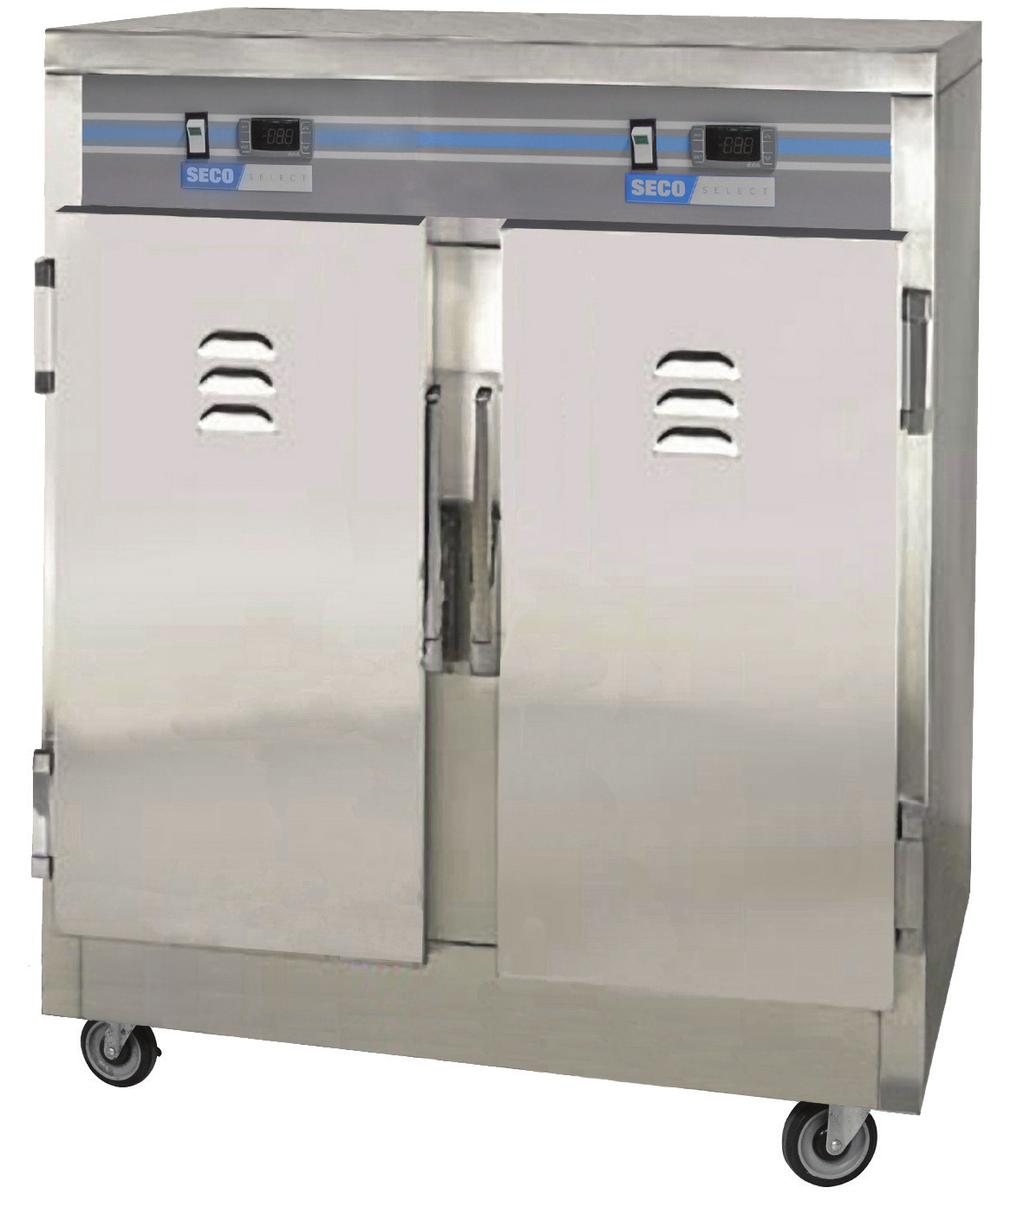 Job: Item No. Mobile Heated Cabinet Heavy duty heated holding/transport cabinet for use with 12 X 20 pans.